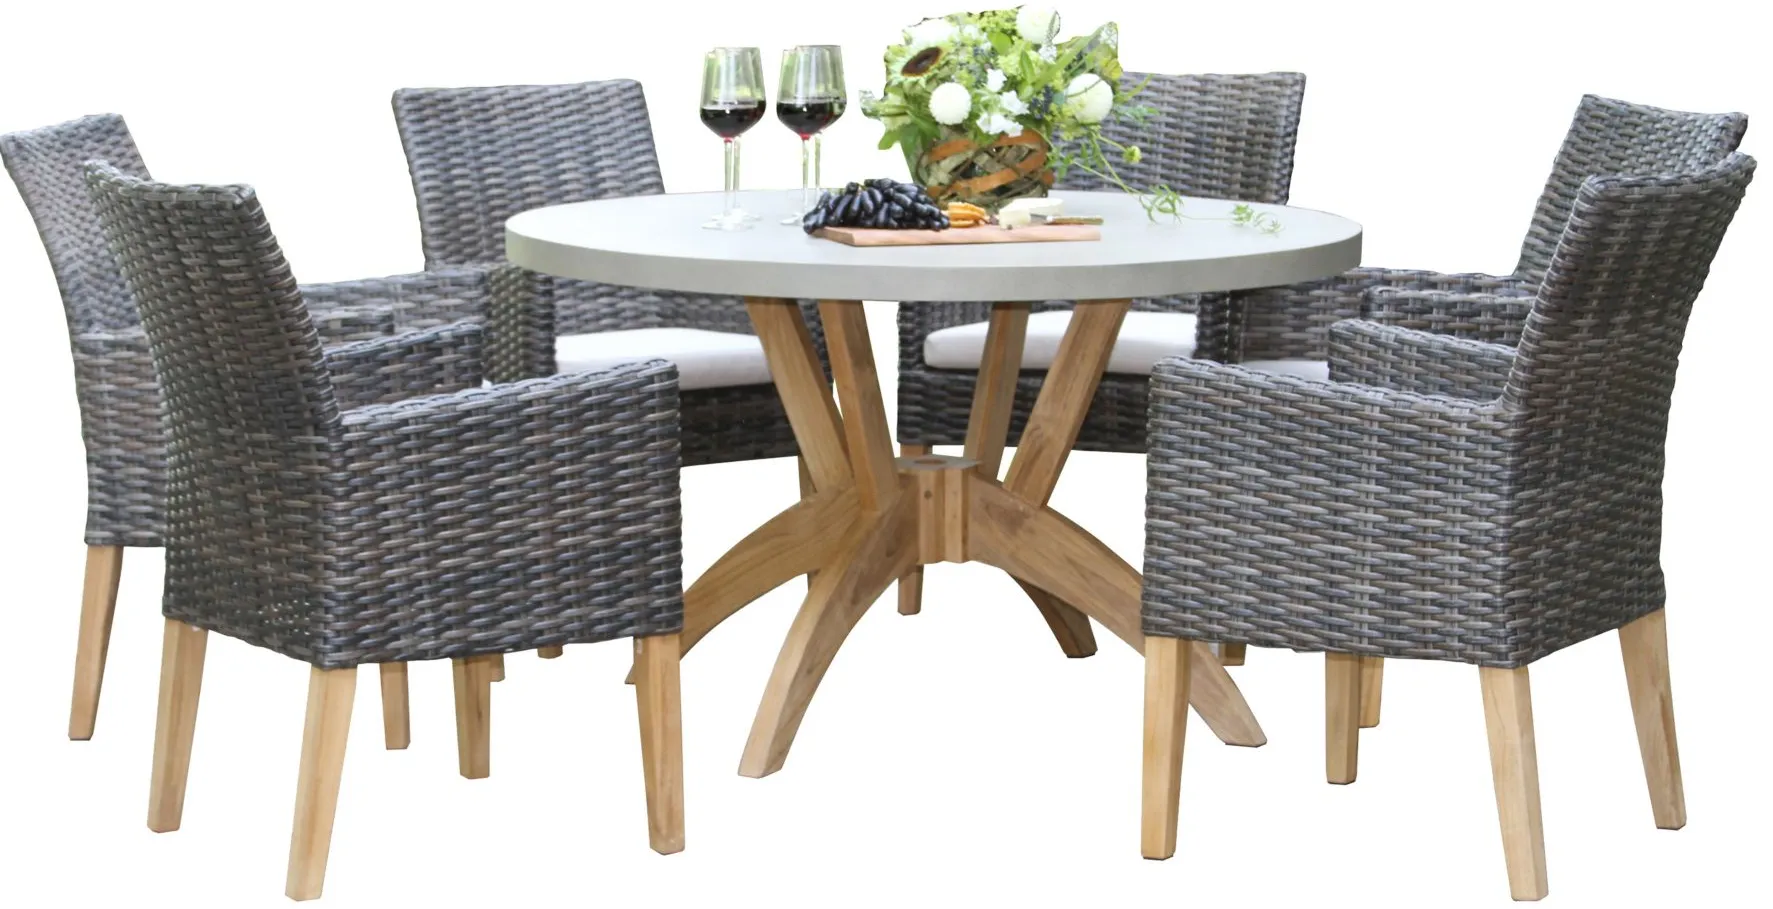 Cagle Outdoor 7-pc Dining Set in Sandstone by Outdoor Interiors